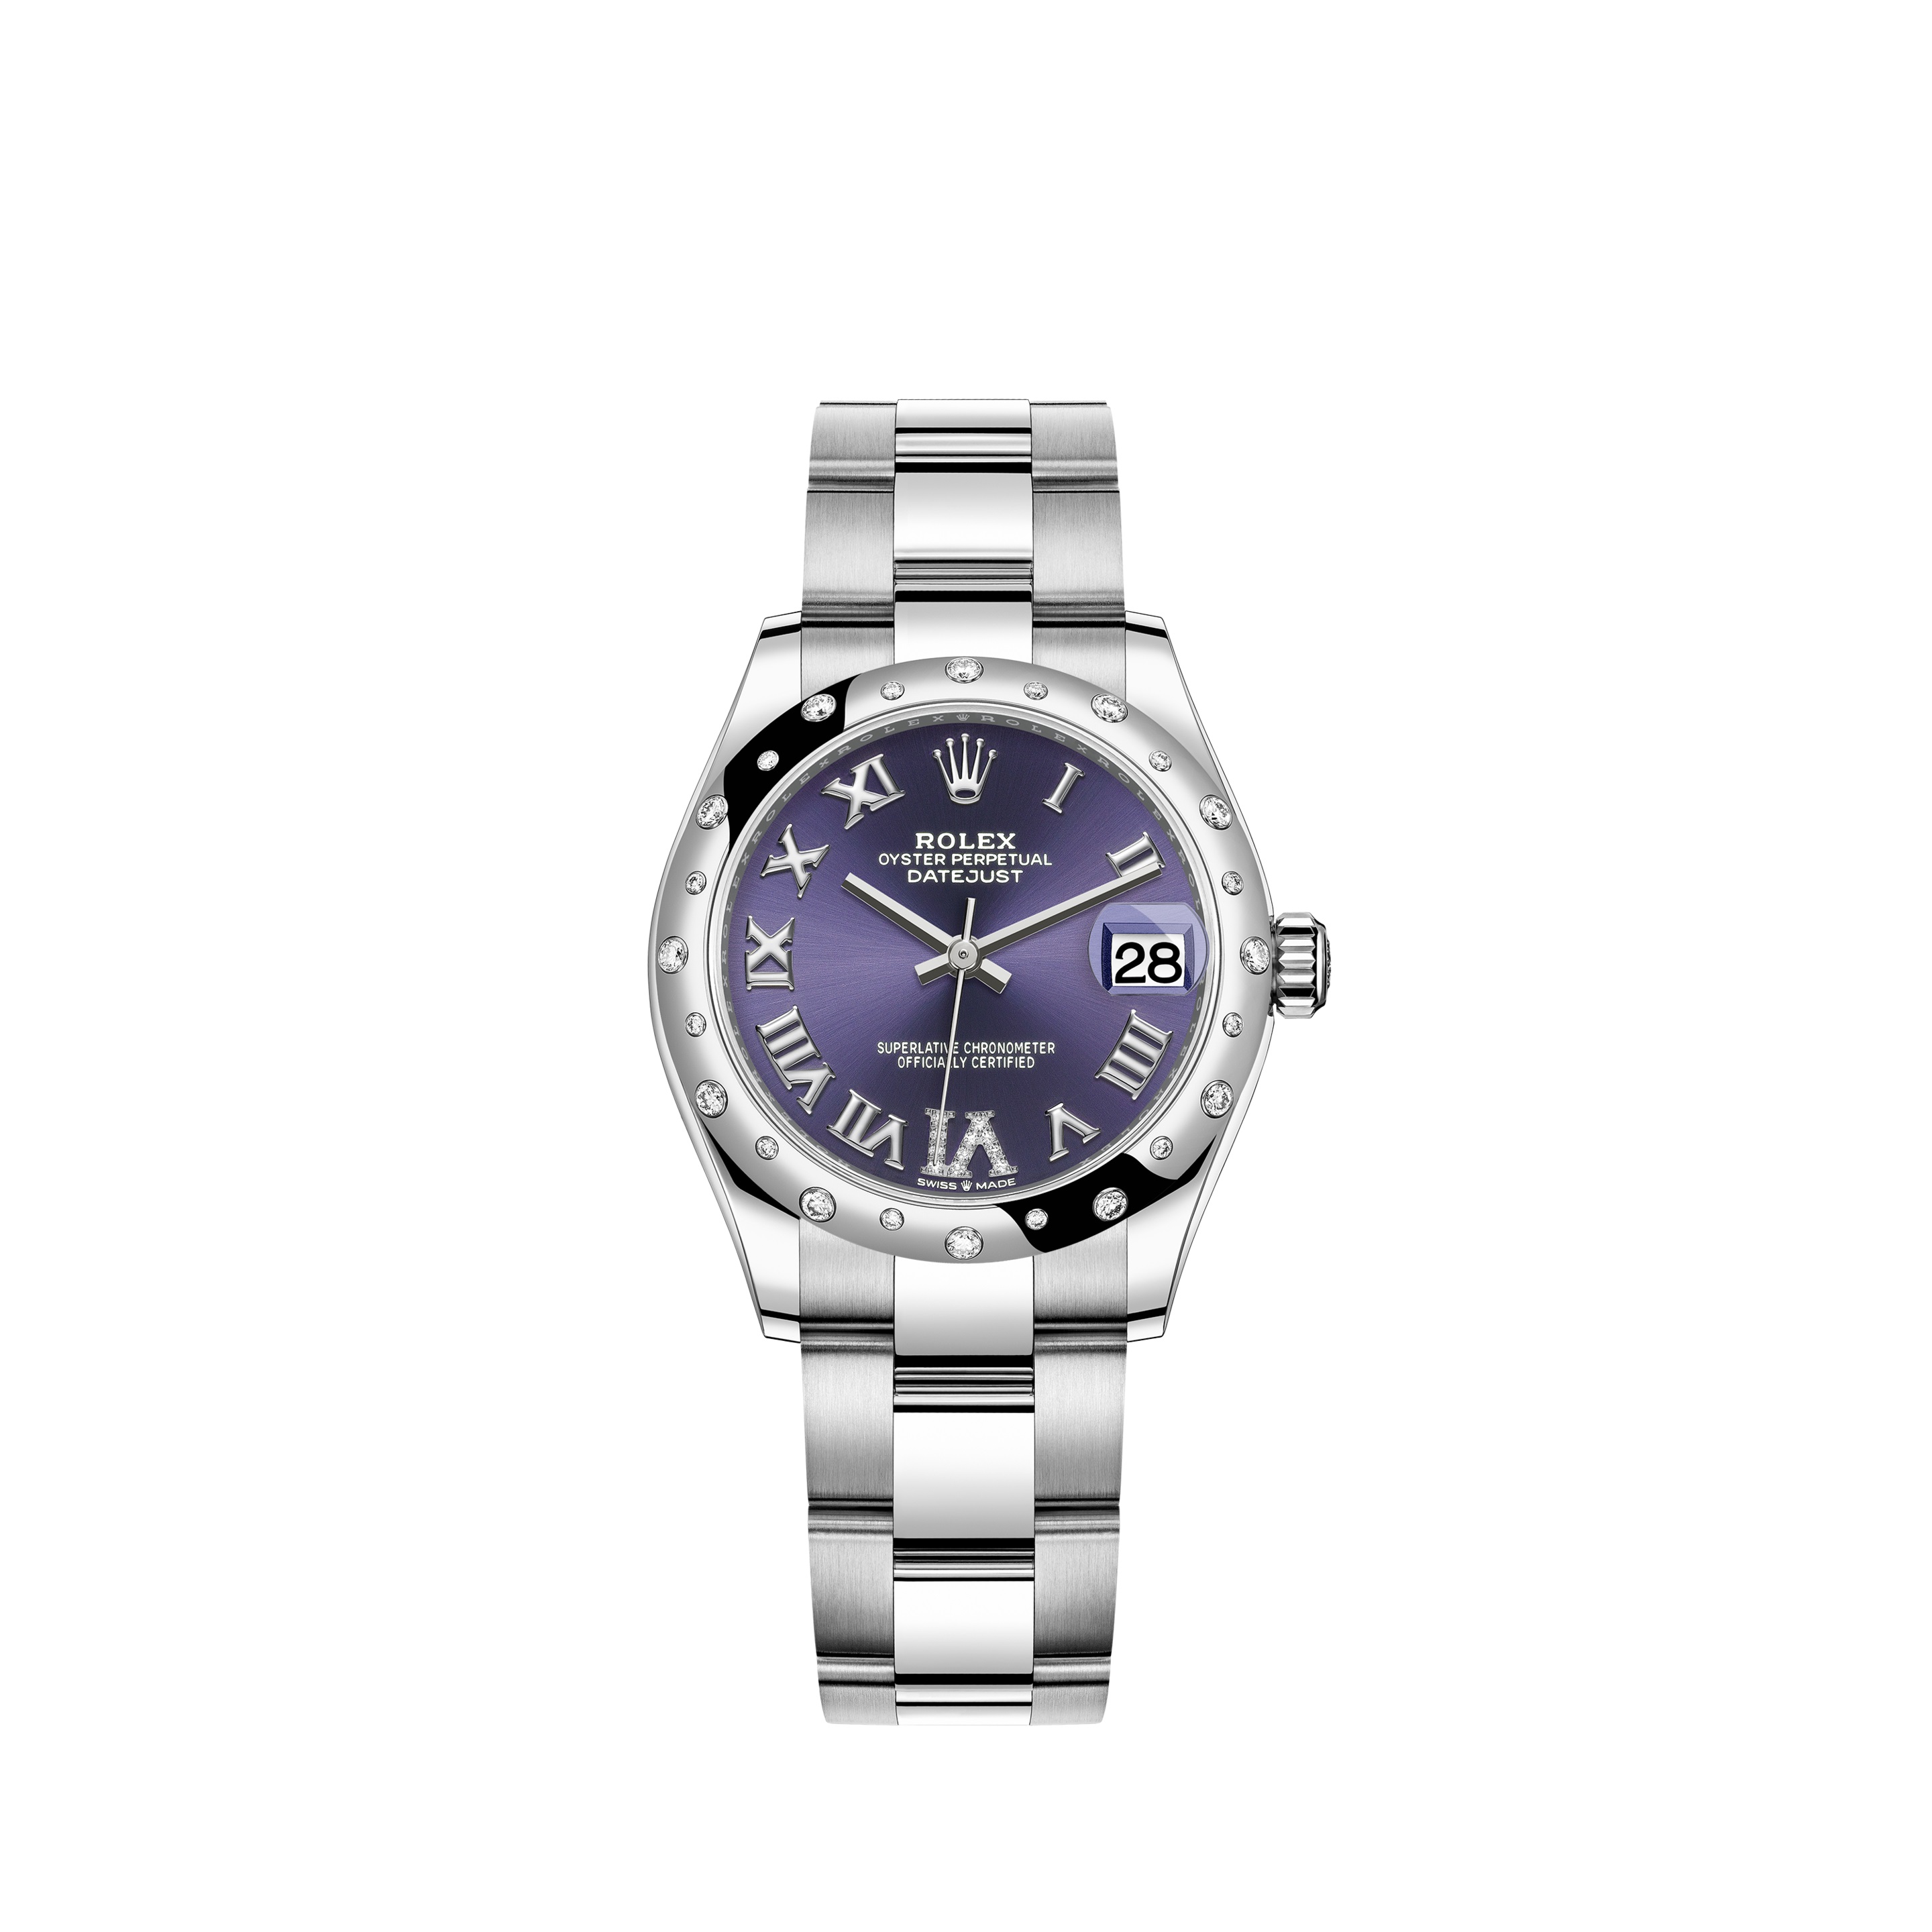 Datejust 31 278344RBR White Gold & Stainless Steel Watch (Aubergine Set with Diamonds)